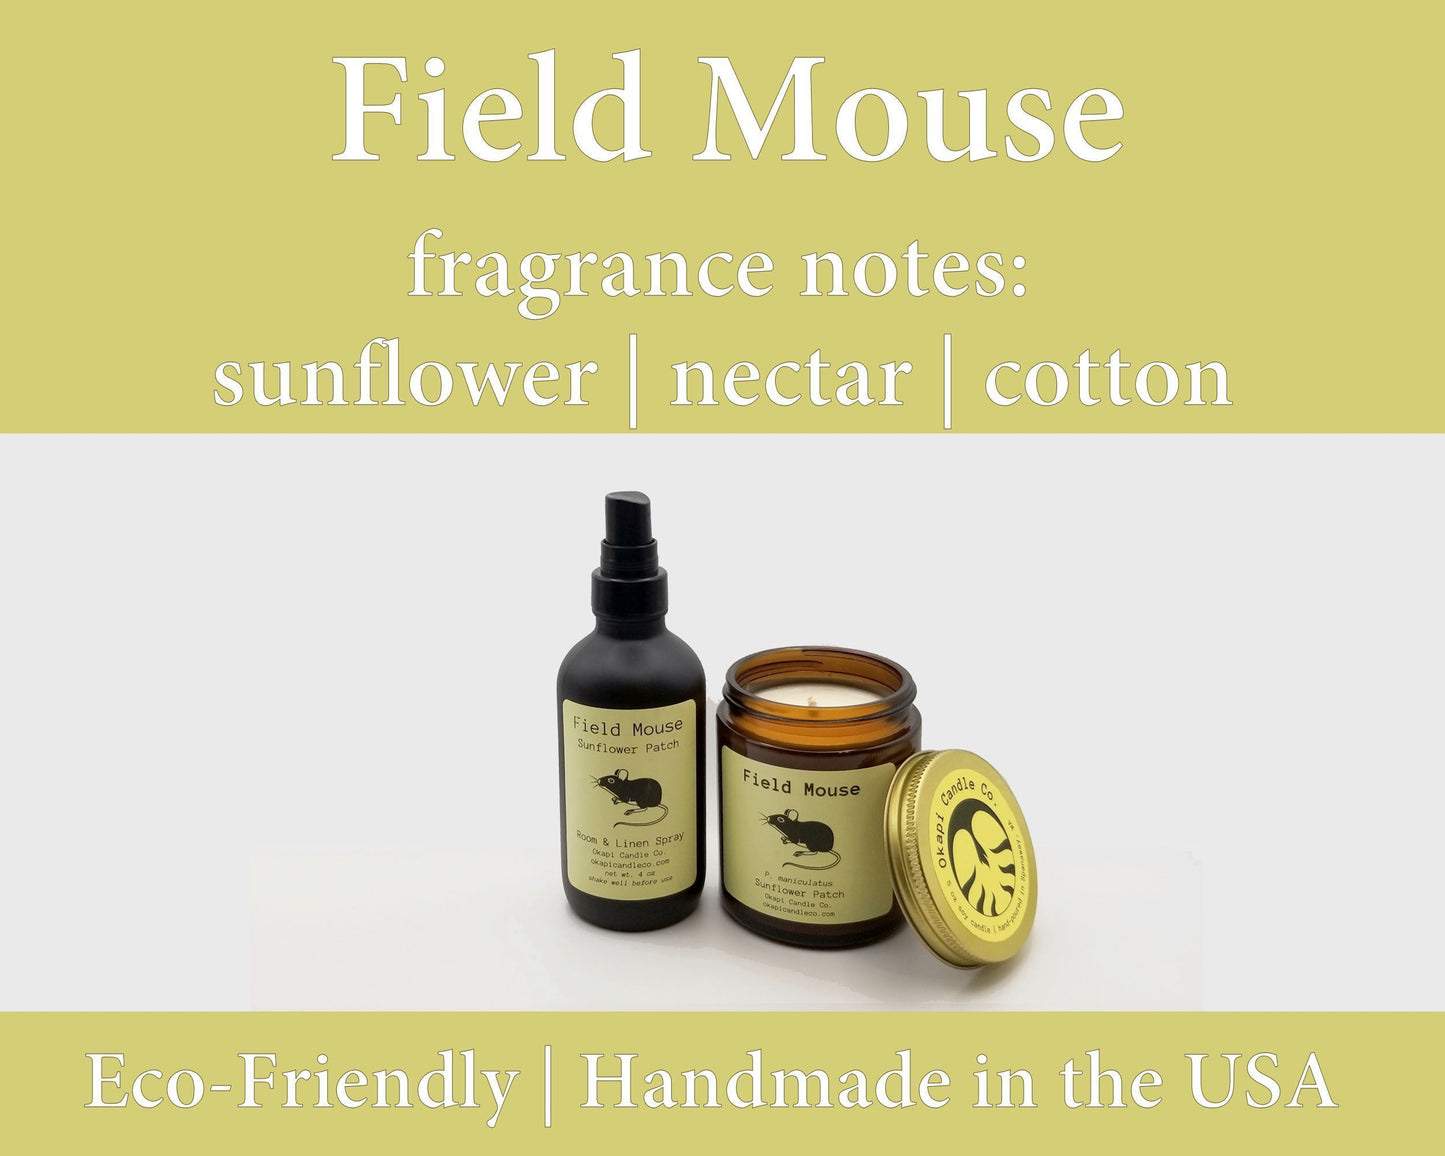 Field Mouse Room & Linen Spray - Sunflower Patch Fragrance